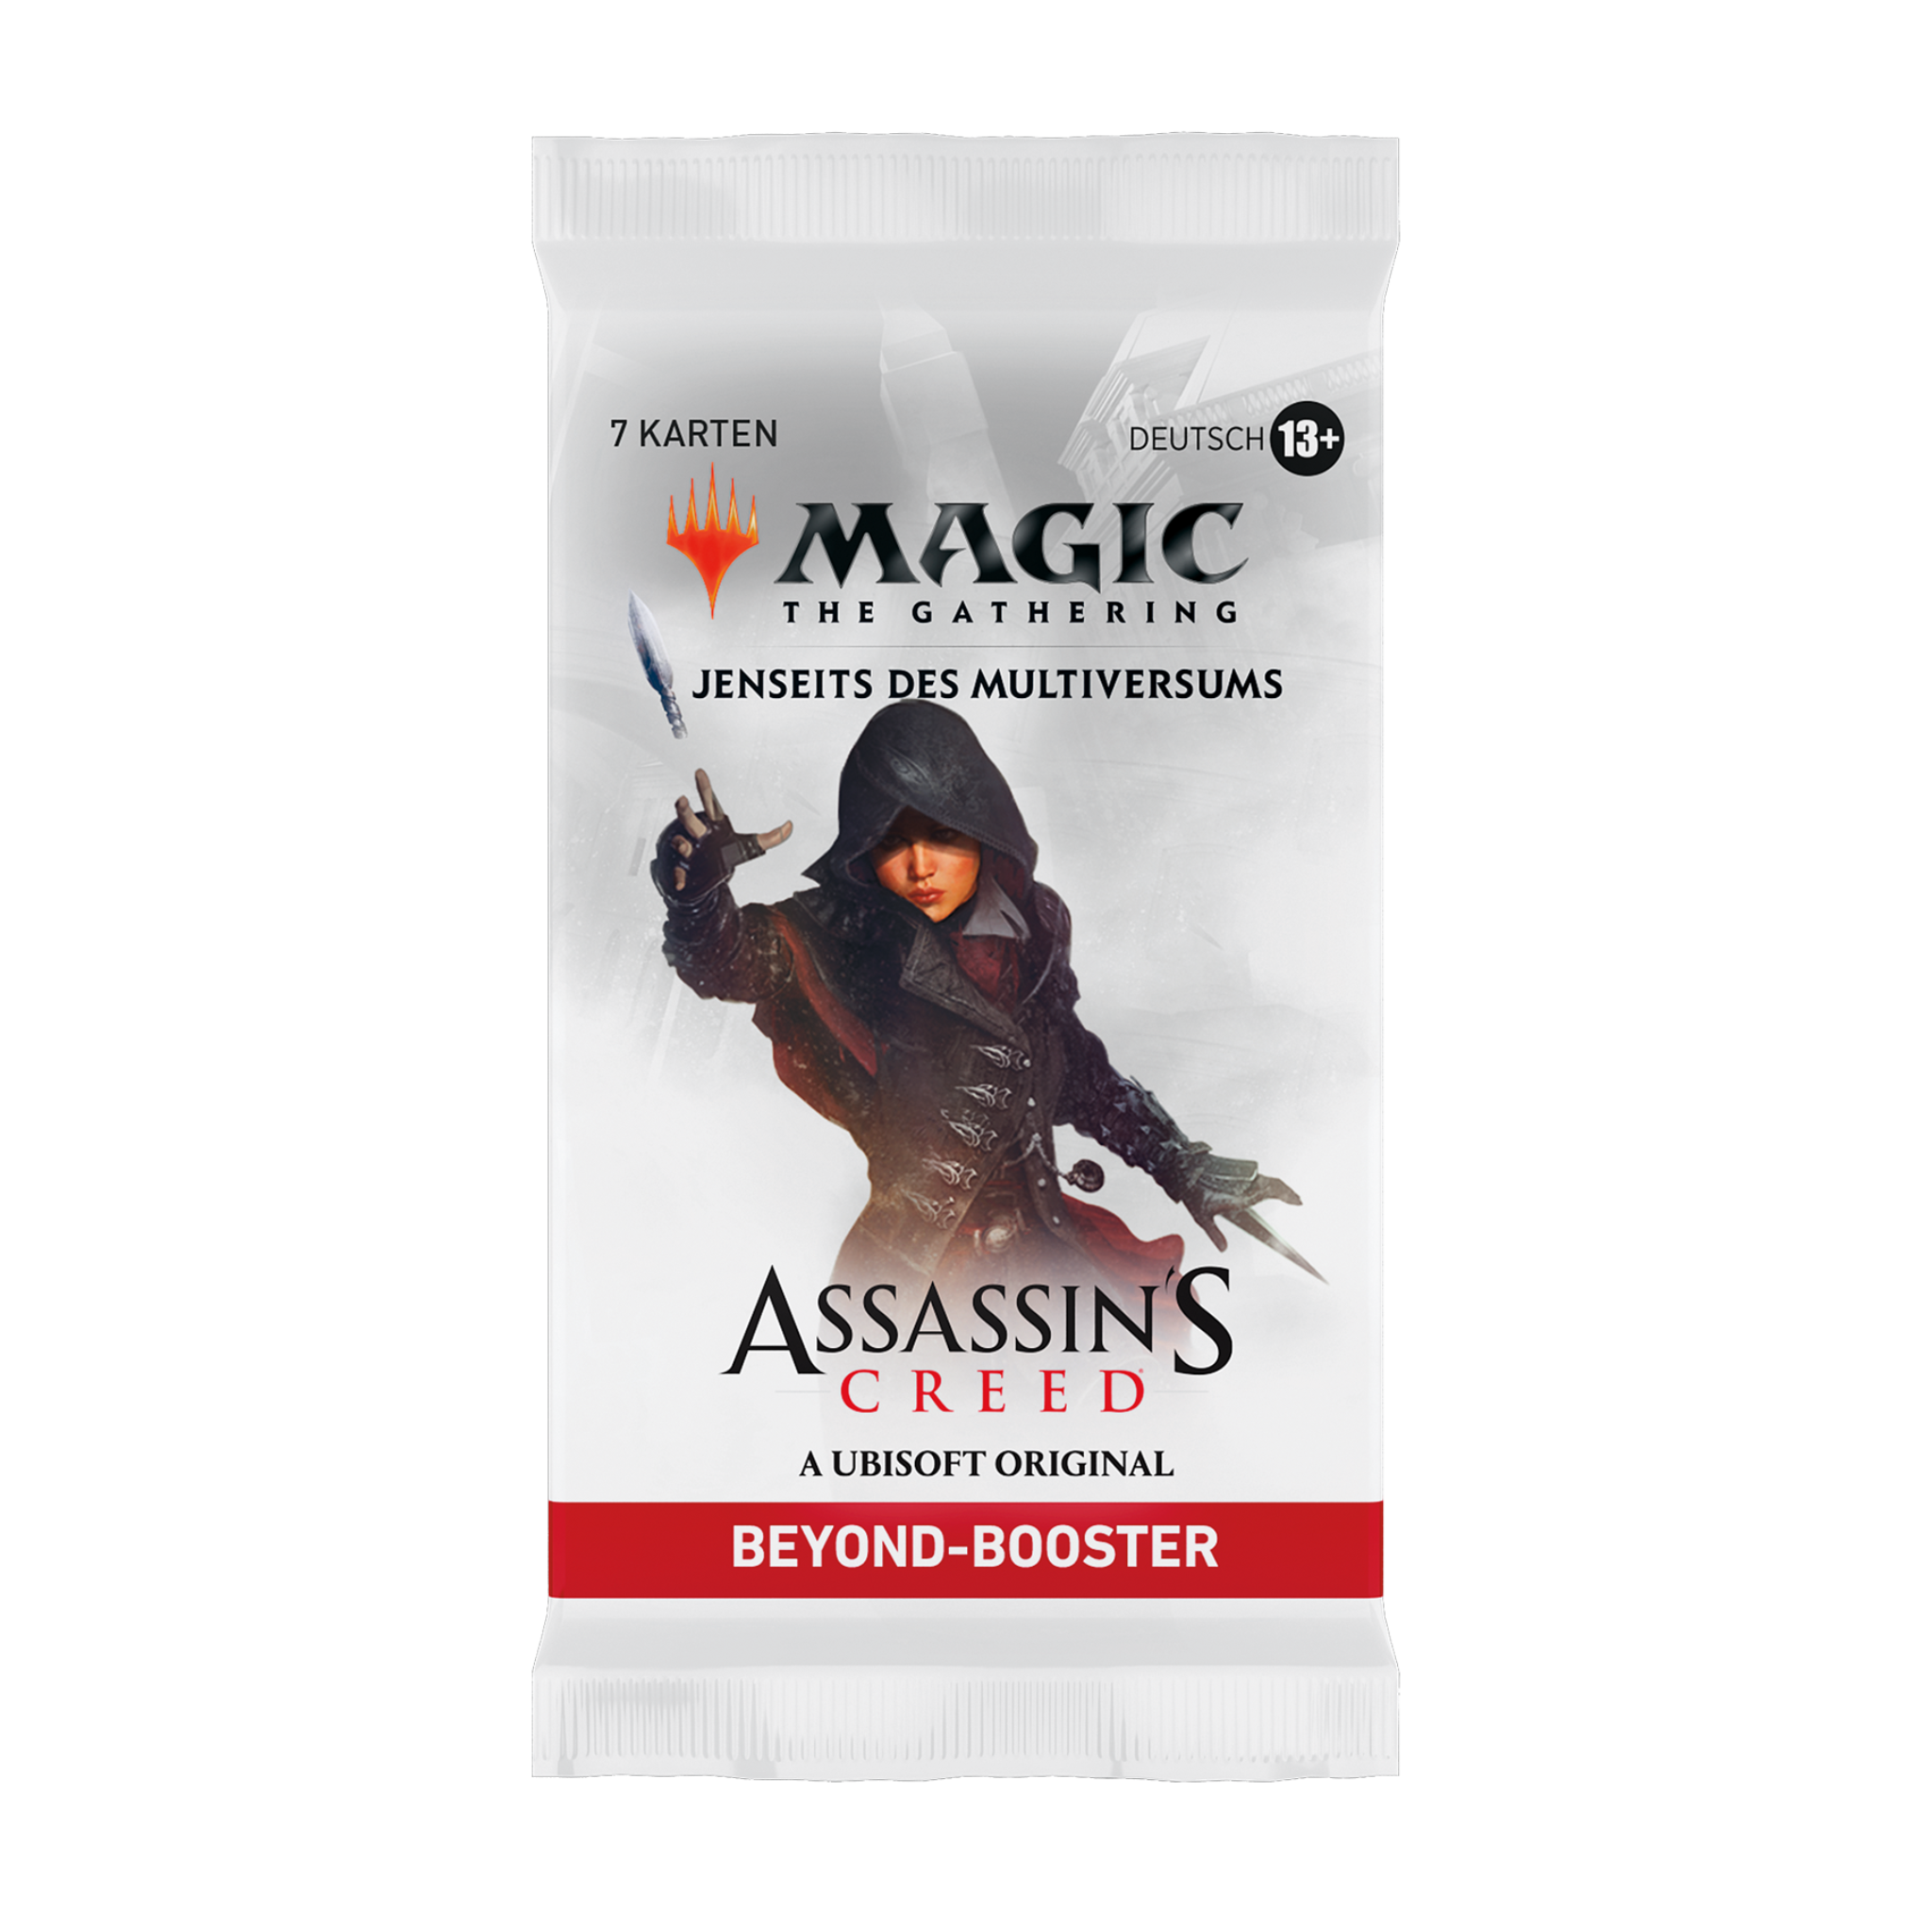 Magic: The Gathering - Jenseits des Multiversums: Assassin's Creed - Beyond-Booster-Display - DE